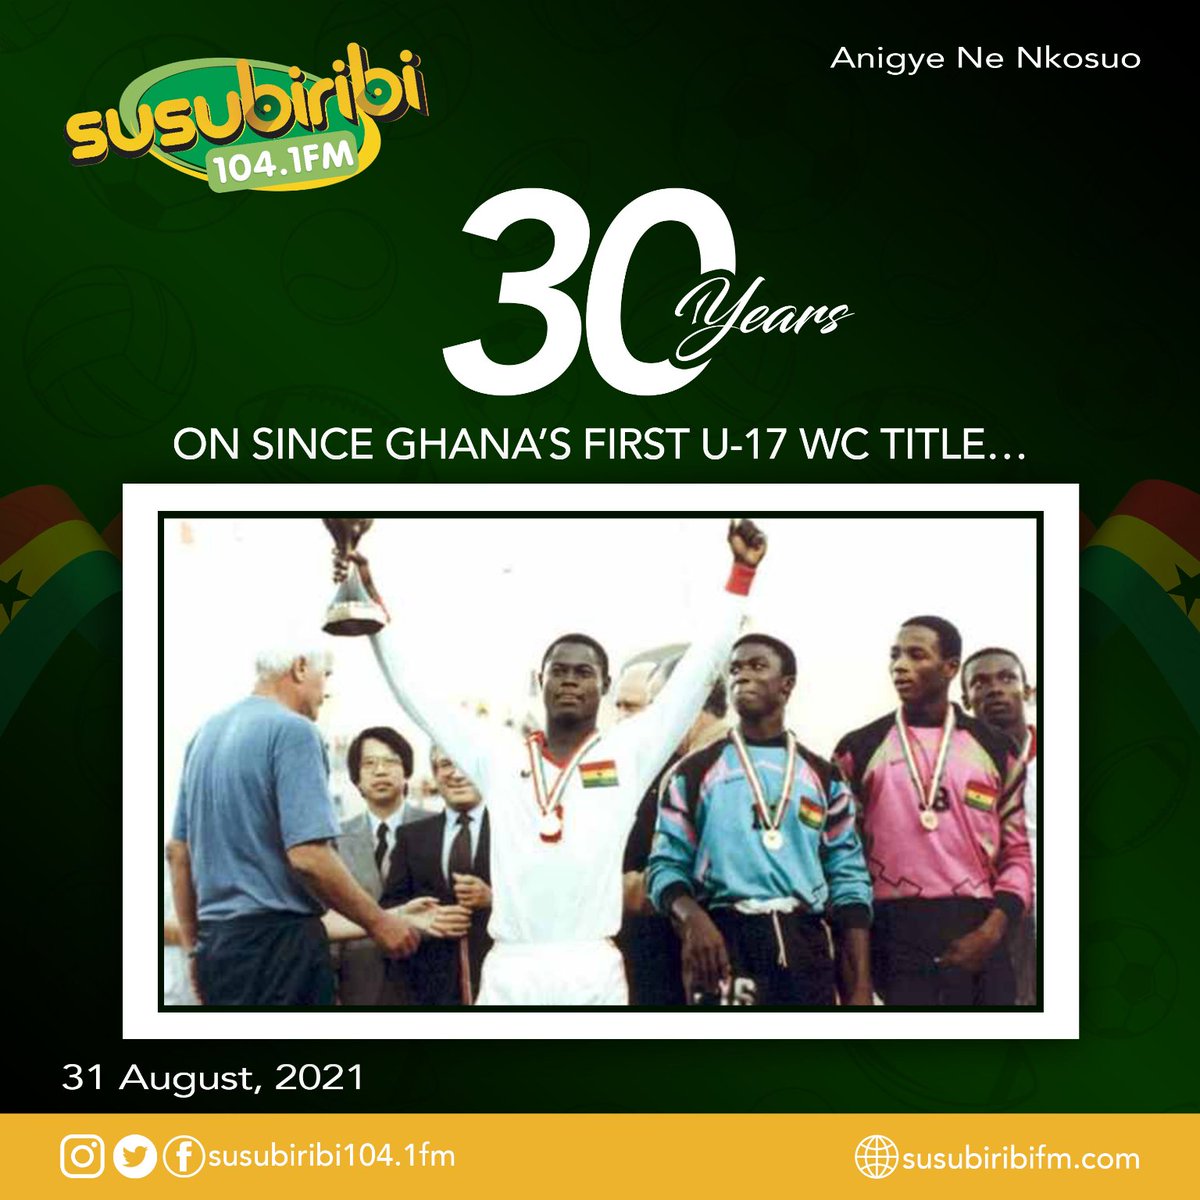 Today is exactly 30 years since the Black Starlets won the ultimate in the 1991 world cup hosted in Italy. 
#ghananews #blackstarlets #1991 #gfa #bringbackthelove #susubiribisports #anigyenenkosuo